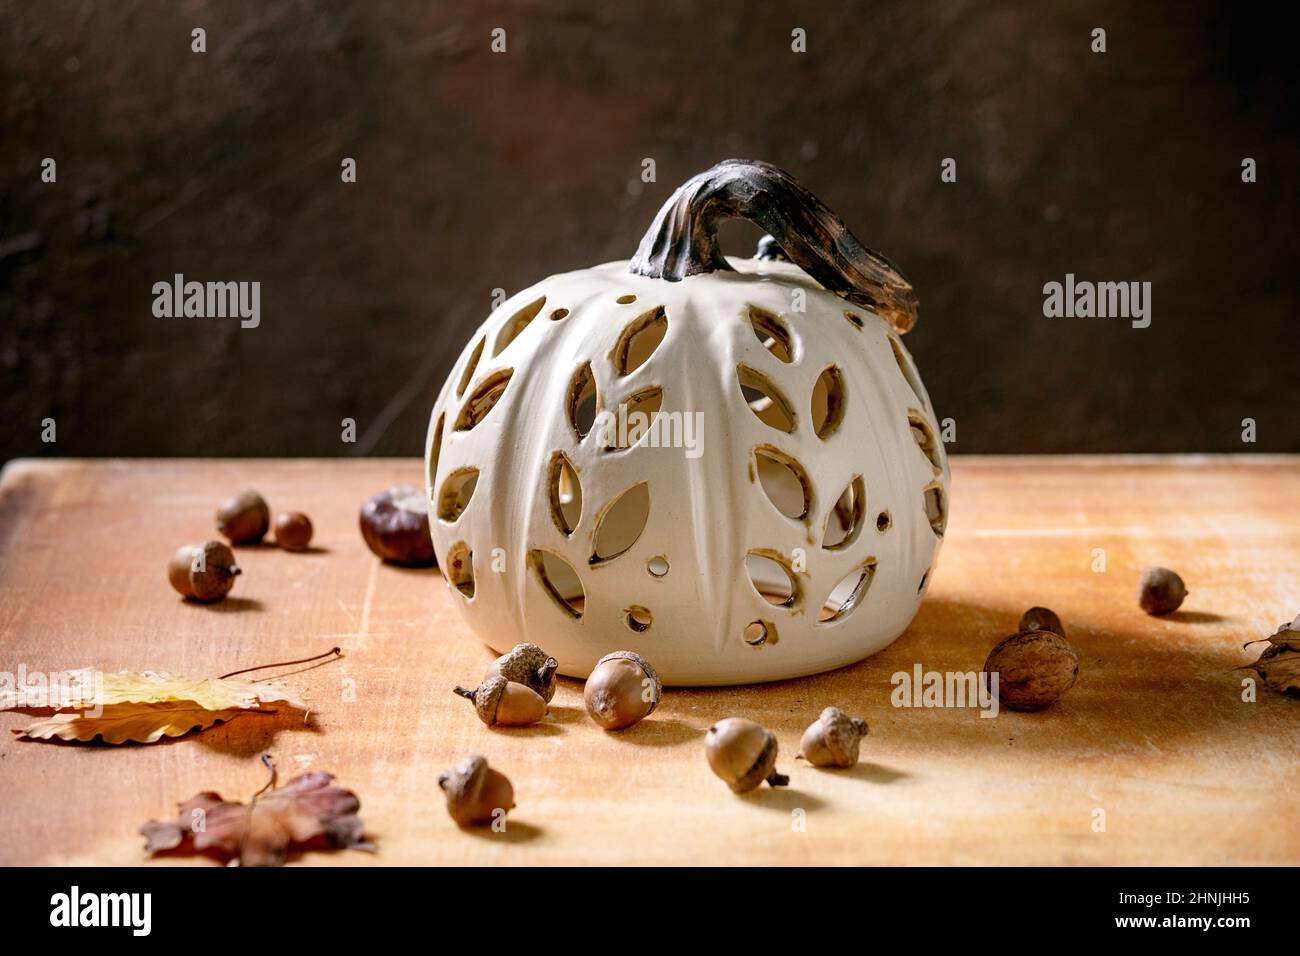 Halloween or Thanksgiving decorations, white handcrafted carved ceramic pumpkin standing on orange stone table with autumn leaves and acorns. Hallowee Stock Photo